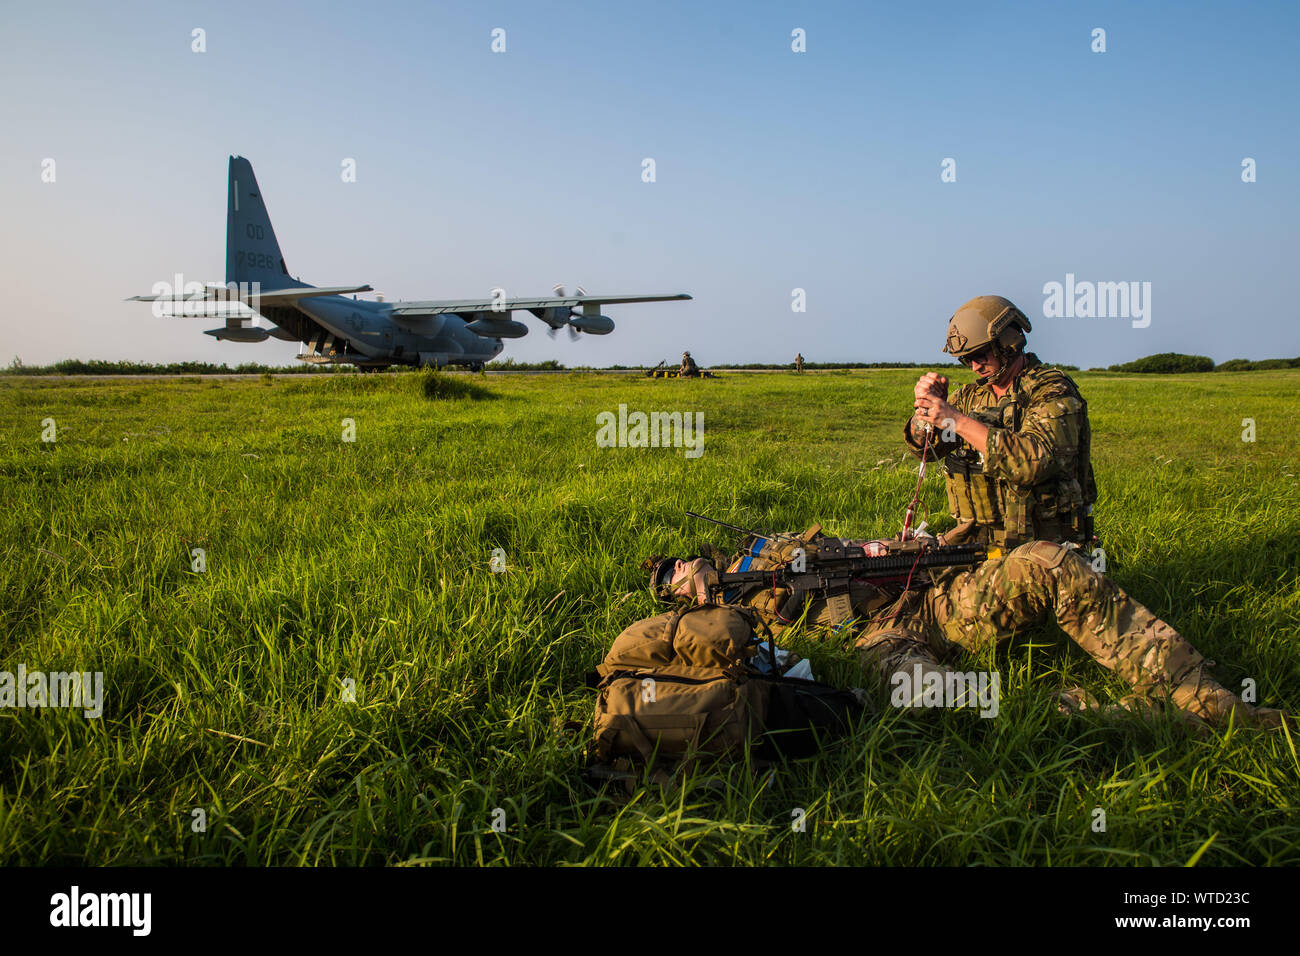 An Air Force medical technician with the 353rd Special Operations Group provides medical attention to a simulated casualty during a simulated airfield seizure after a long-range raid from the amphibious assault ship USS Wasp (LHD 1) at Ie Shima Training Facility, Okinawa, Japan, Aug. 12, 2019 The 31st MEU and Amphibious Squadron 11, aboard Wasp Amphibious Ready Group ships, conducted a series of sequential operations which simulated naval expeditionary combined-arms maneuver from amphibious assets to shore, utilizing Marine Air-Ground Task Force capabilities integrated across all warfighting d Stock Photo